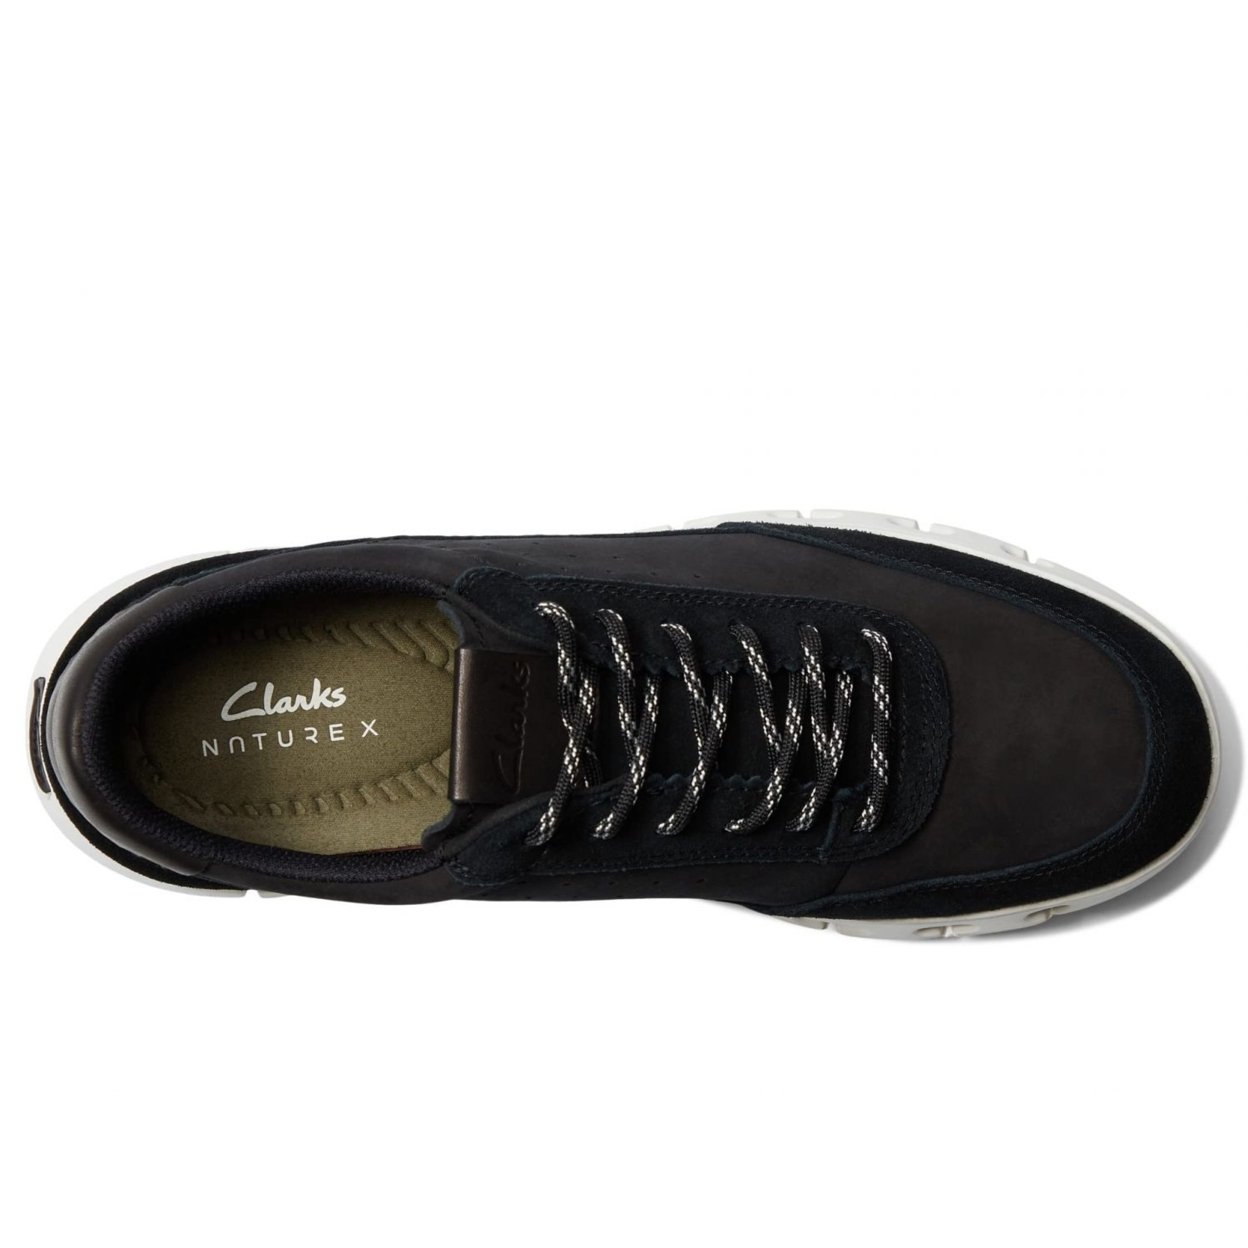 Clarks Nature X One AD TEMPLATE SIZE - Black Combi, 10